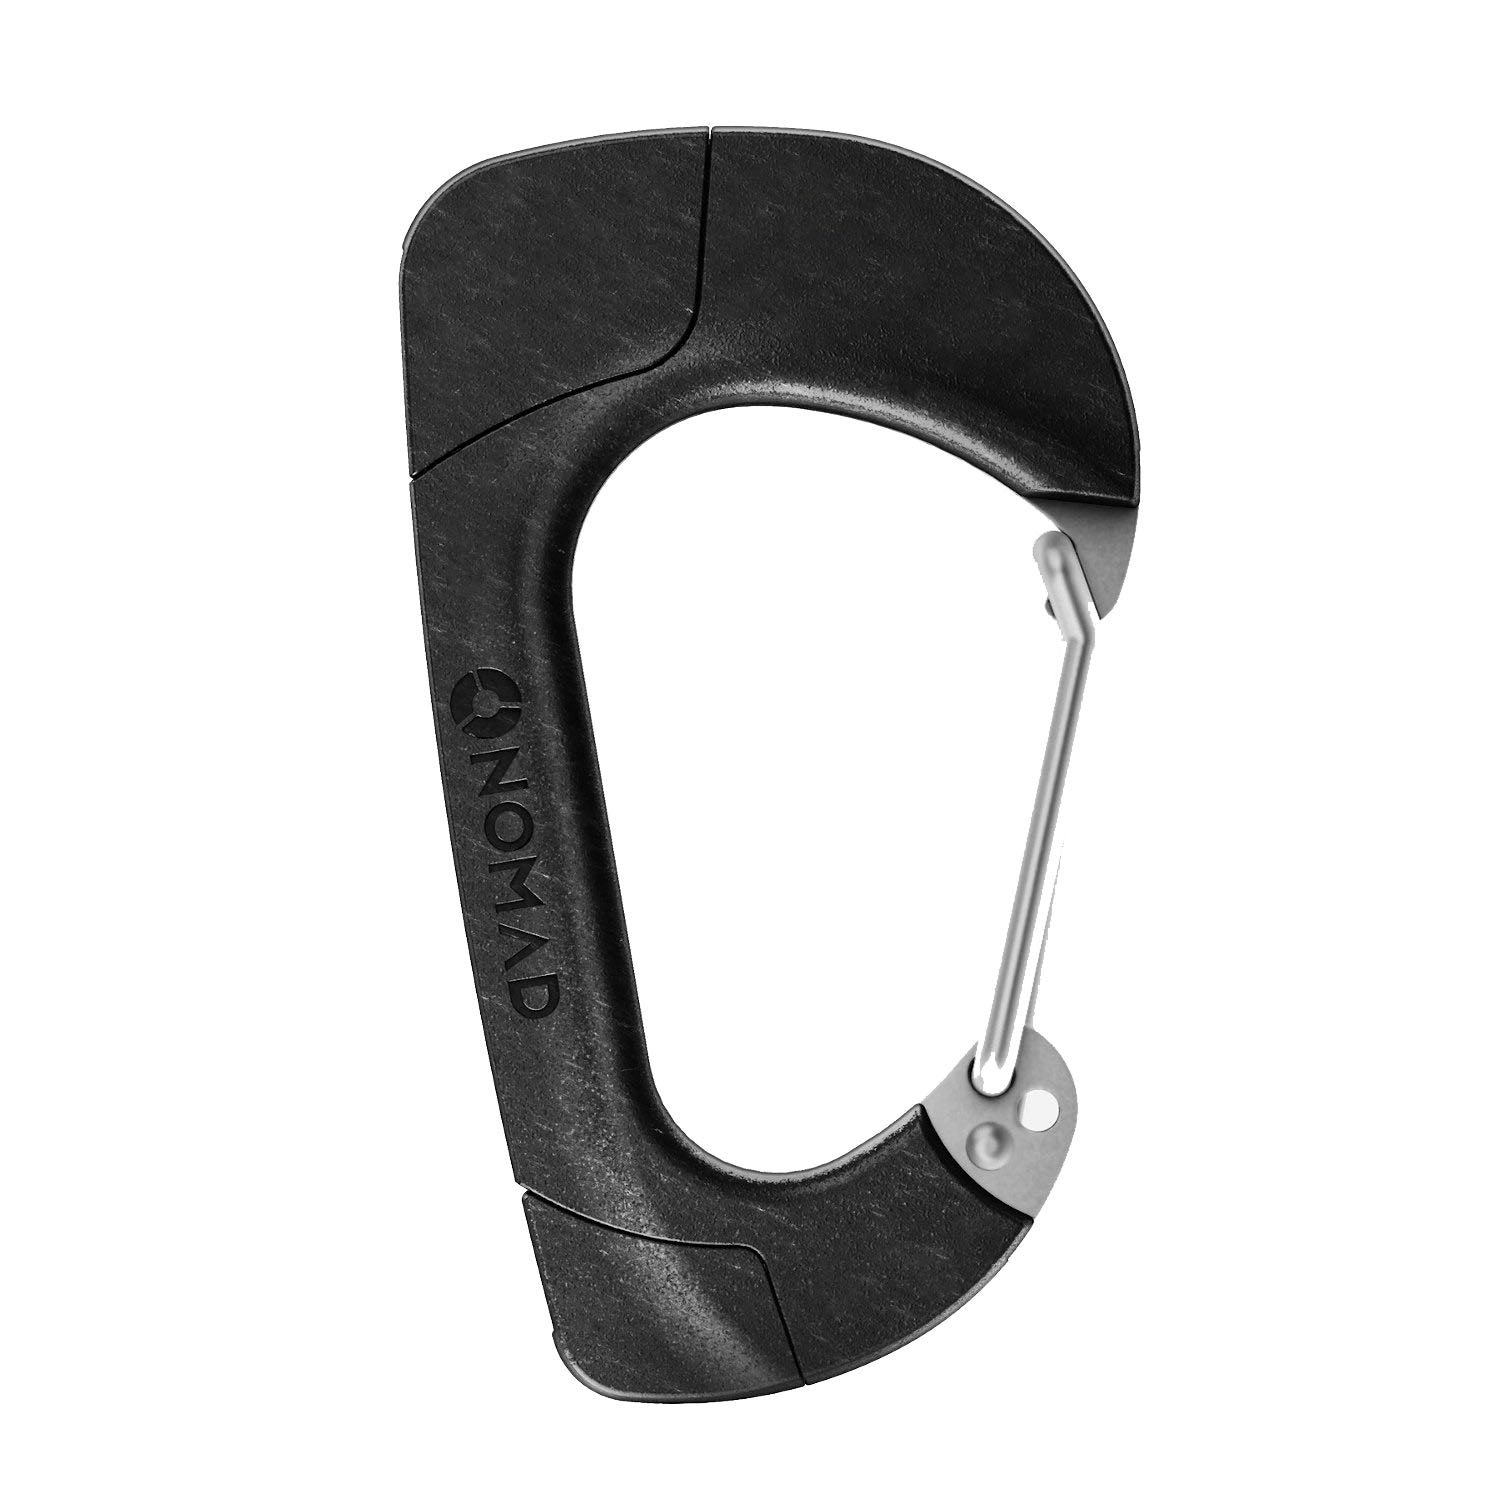 NOMAD Carbon Carabiner with USB-A to Lightning Connector, Black Accessories NOMAD 